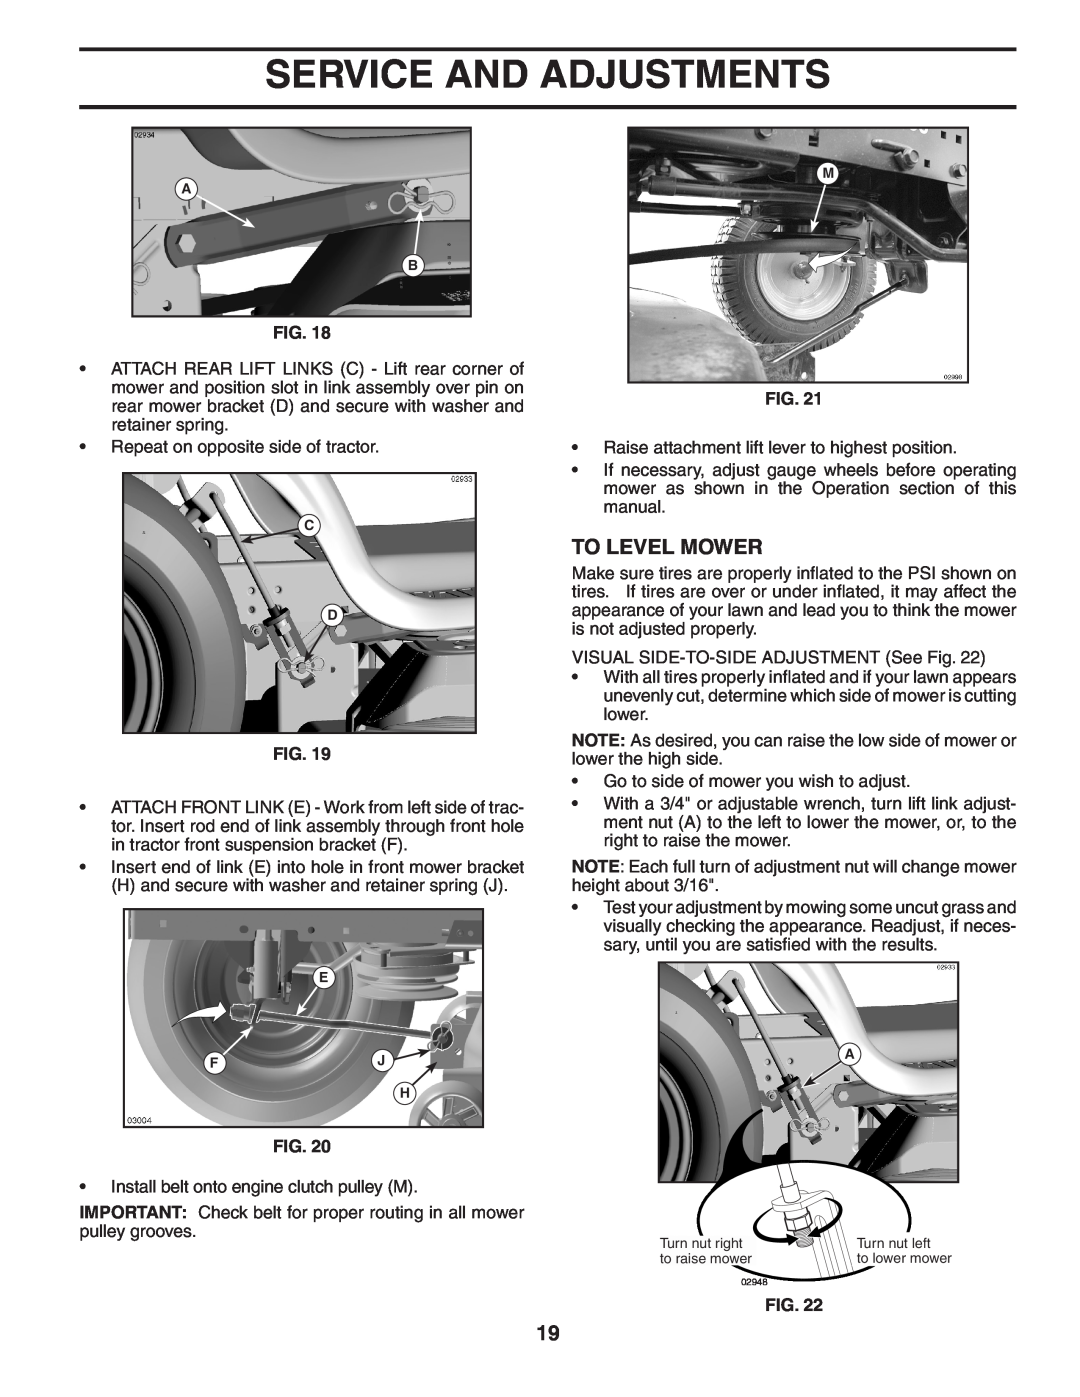 Husqvarna YTH20F42T owner manual To Level Mower, Service And Adjustments, Turn nut right, Turn nut left, to raise mower 